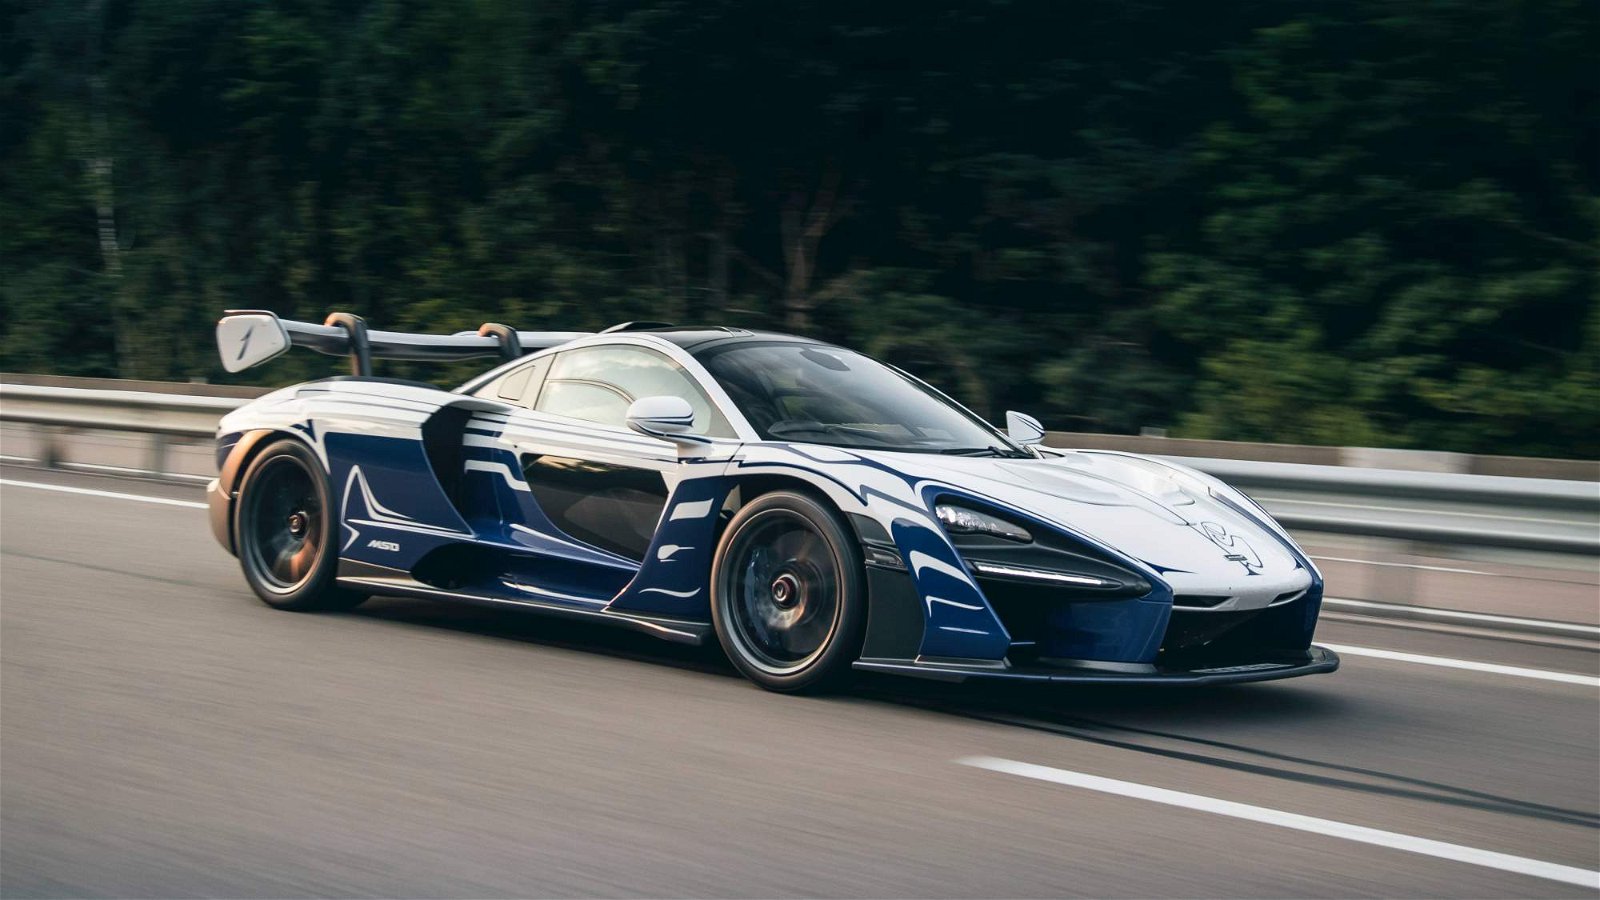 McLaren-Senna-chassis-001-on-maiden-road-trip-to-Paul-Ricard-circuit-5